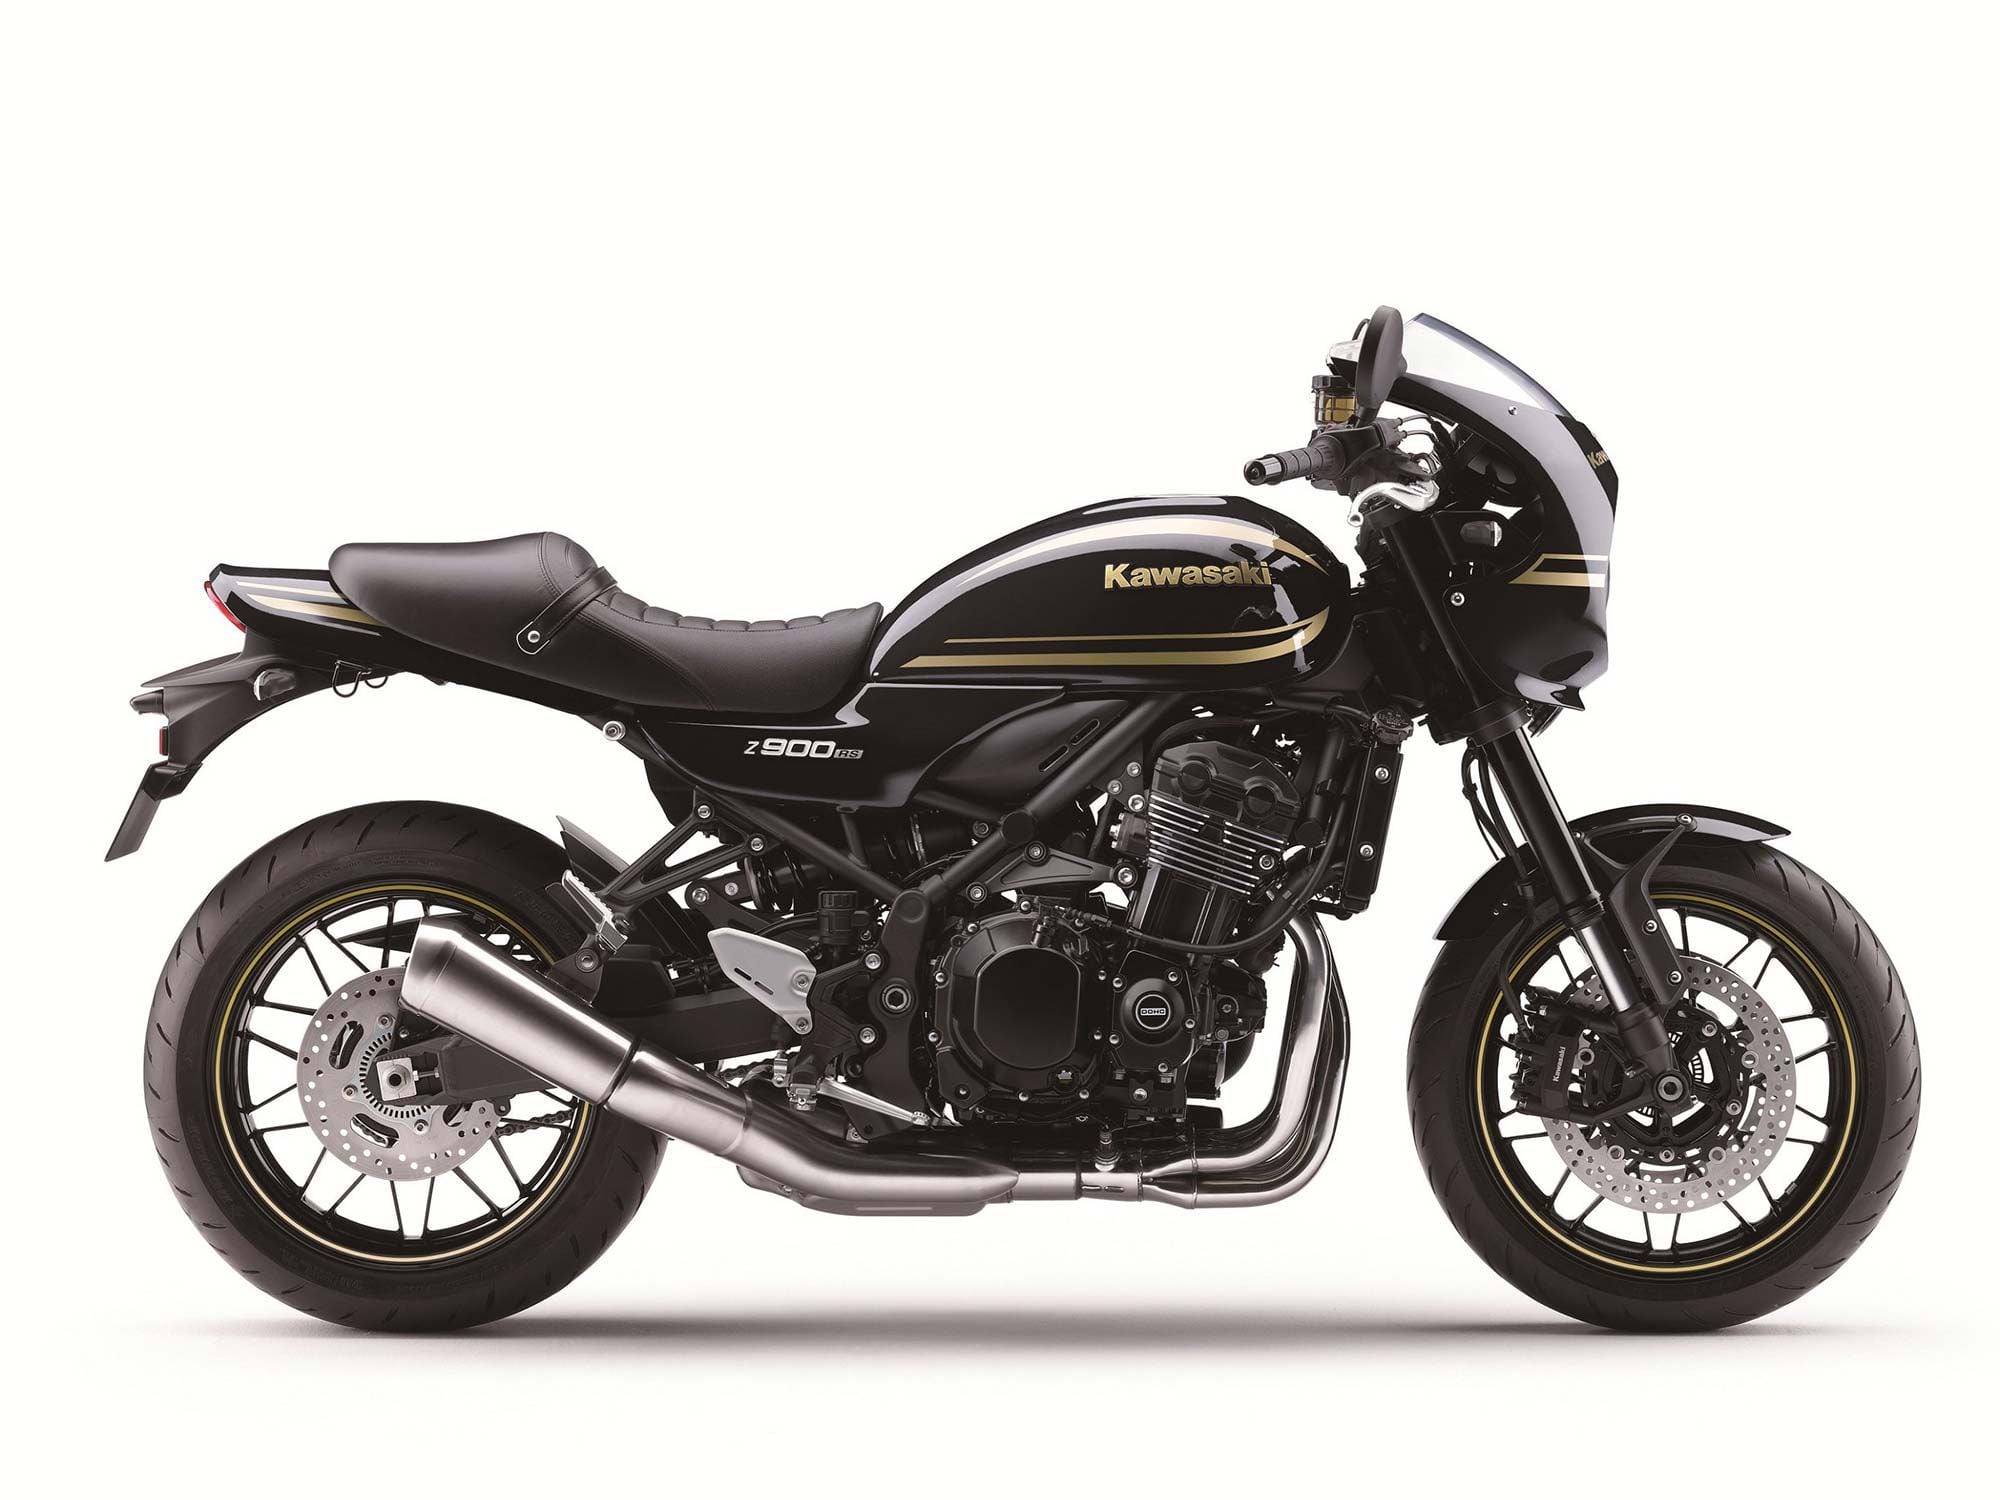 The Z900RS Cafe adds sleek bodywork, a different seat and bars, and unique graphics on the tank, but is otherwise mechanically the same.